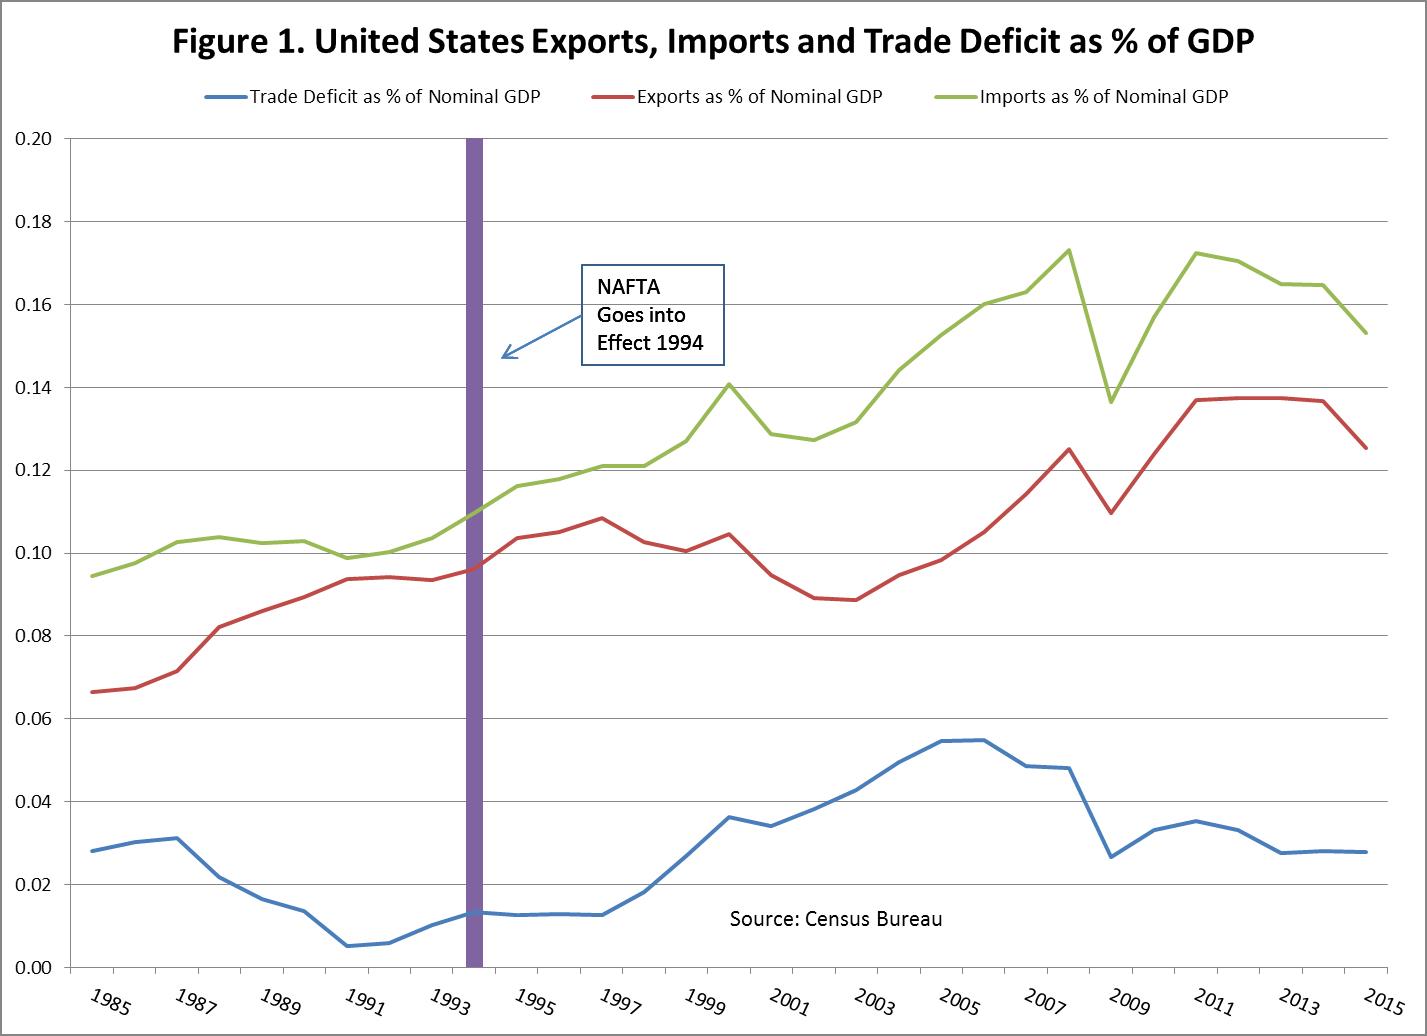 US Exports, Imports And Trade Deficit As % Of GDP